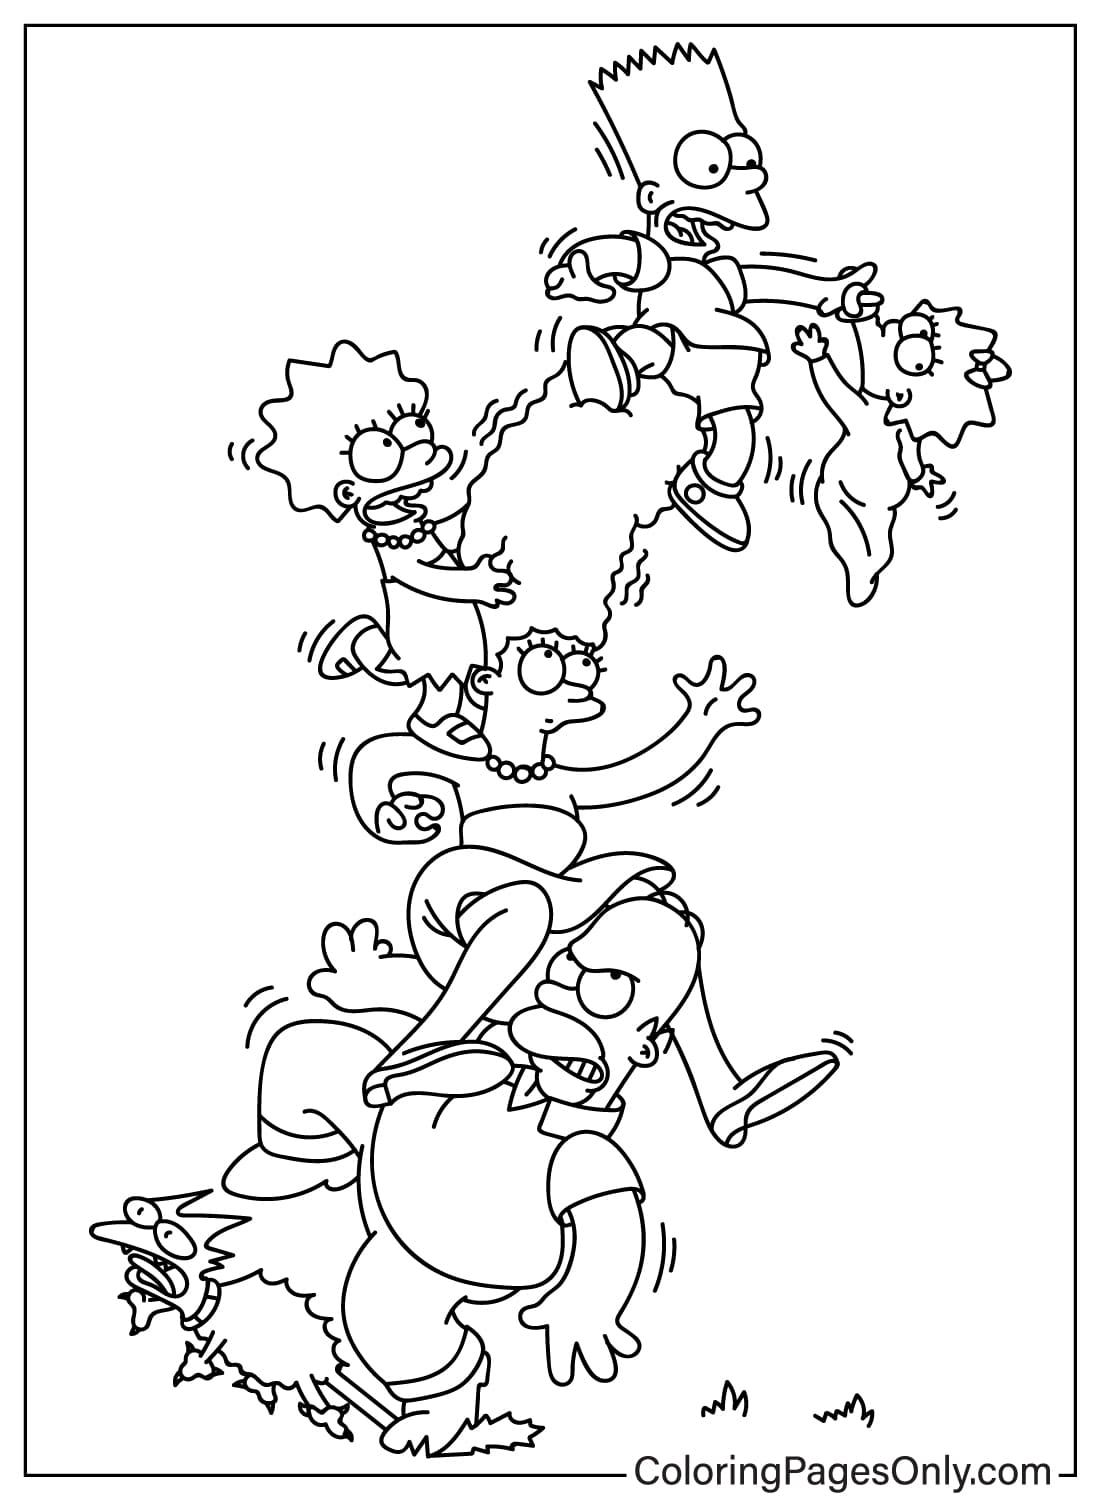 Simpsons Coloring Page Free from Simpsons